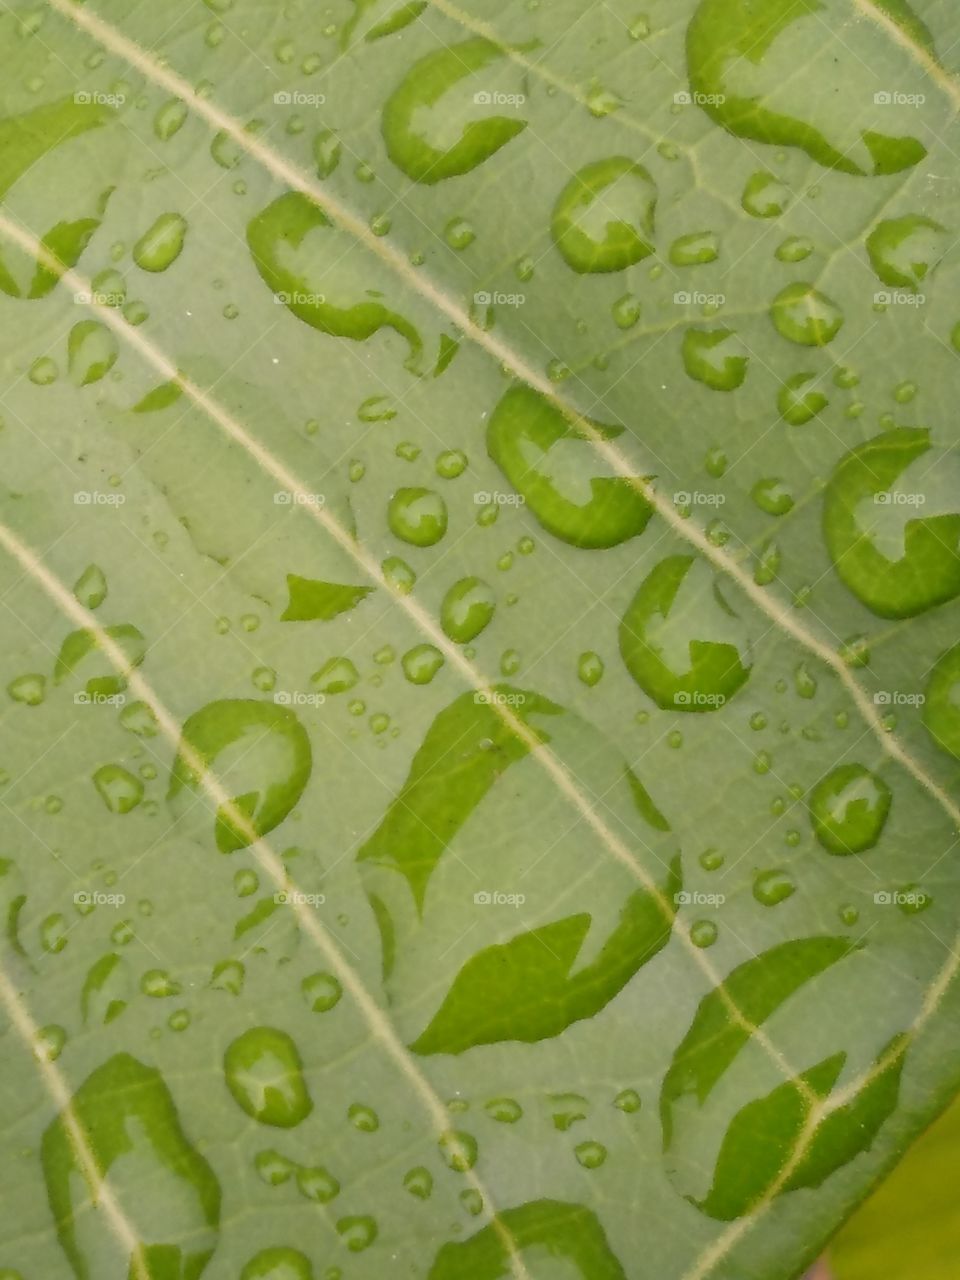 Water Drops On Leaves